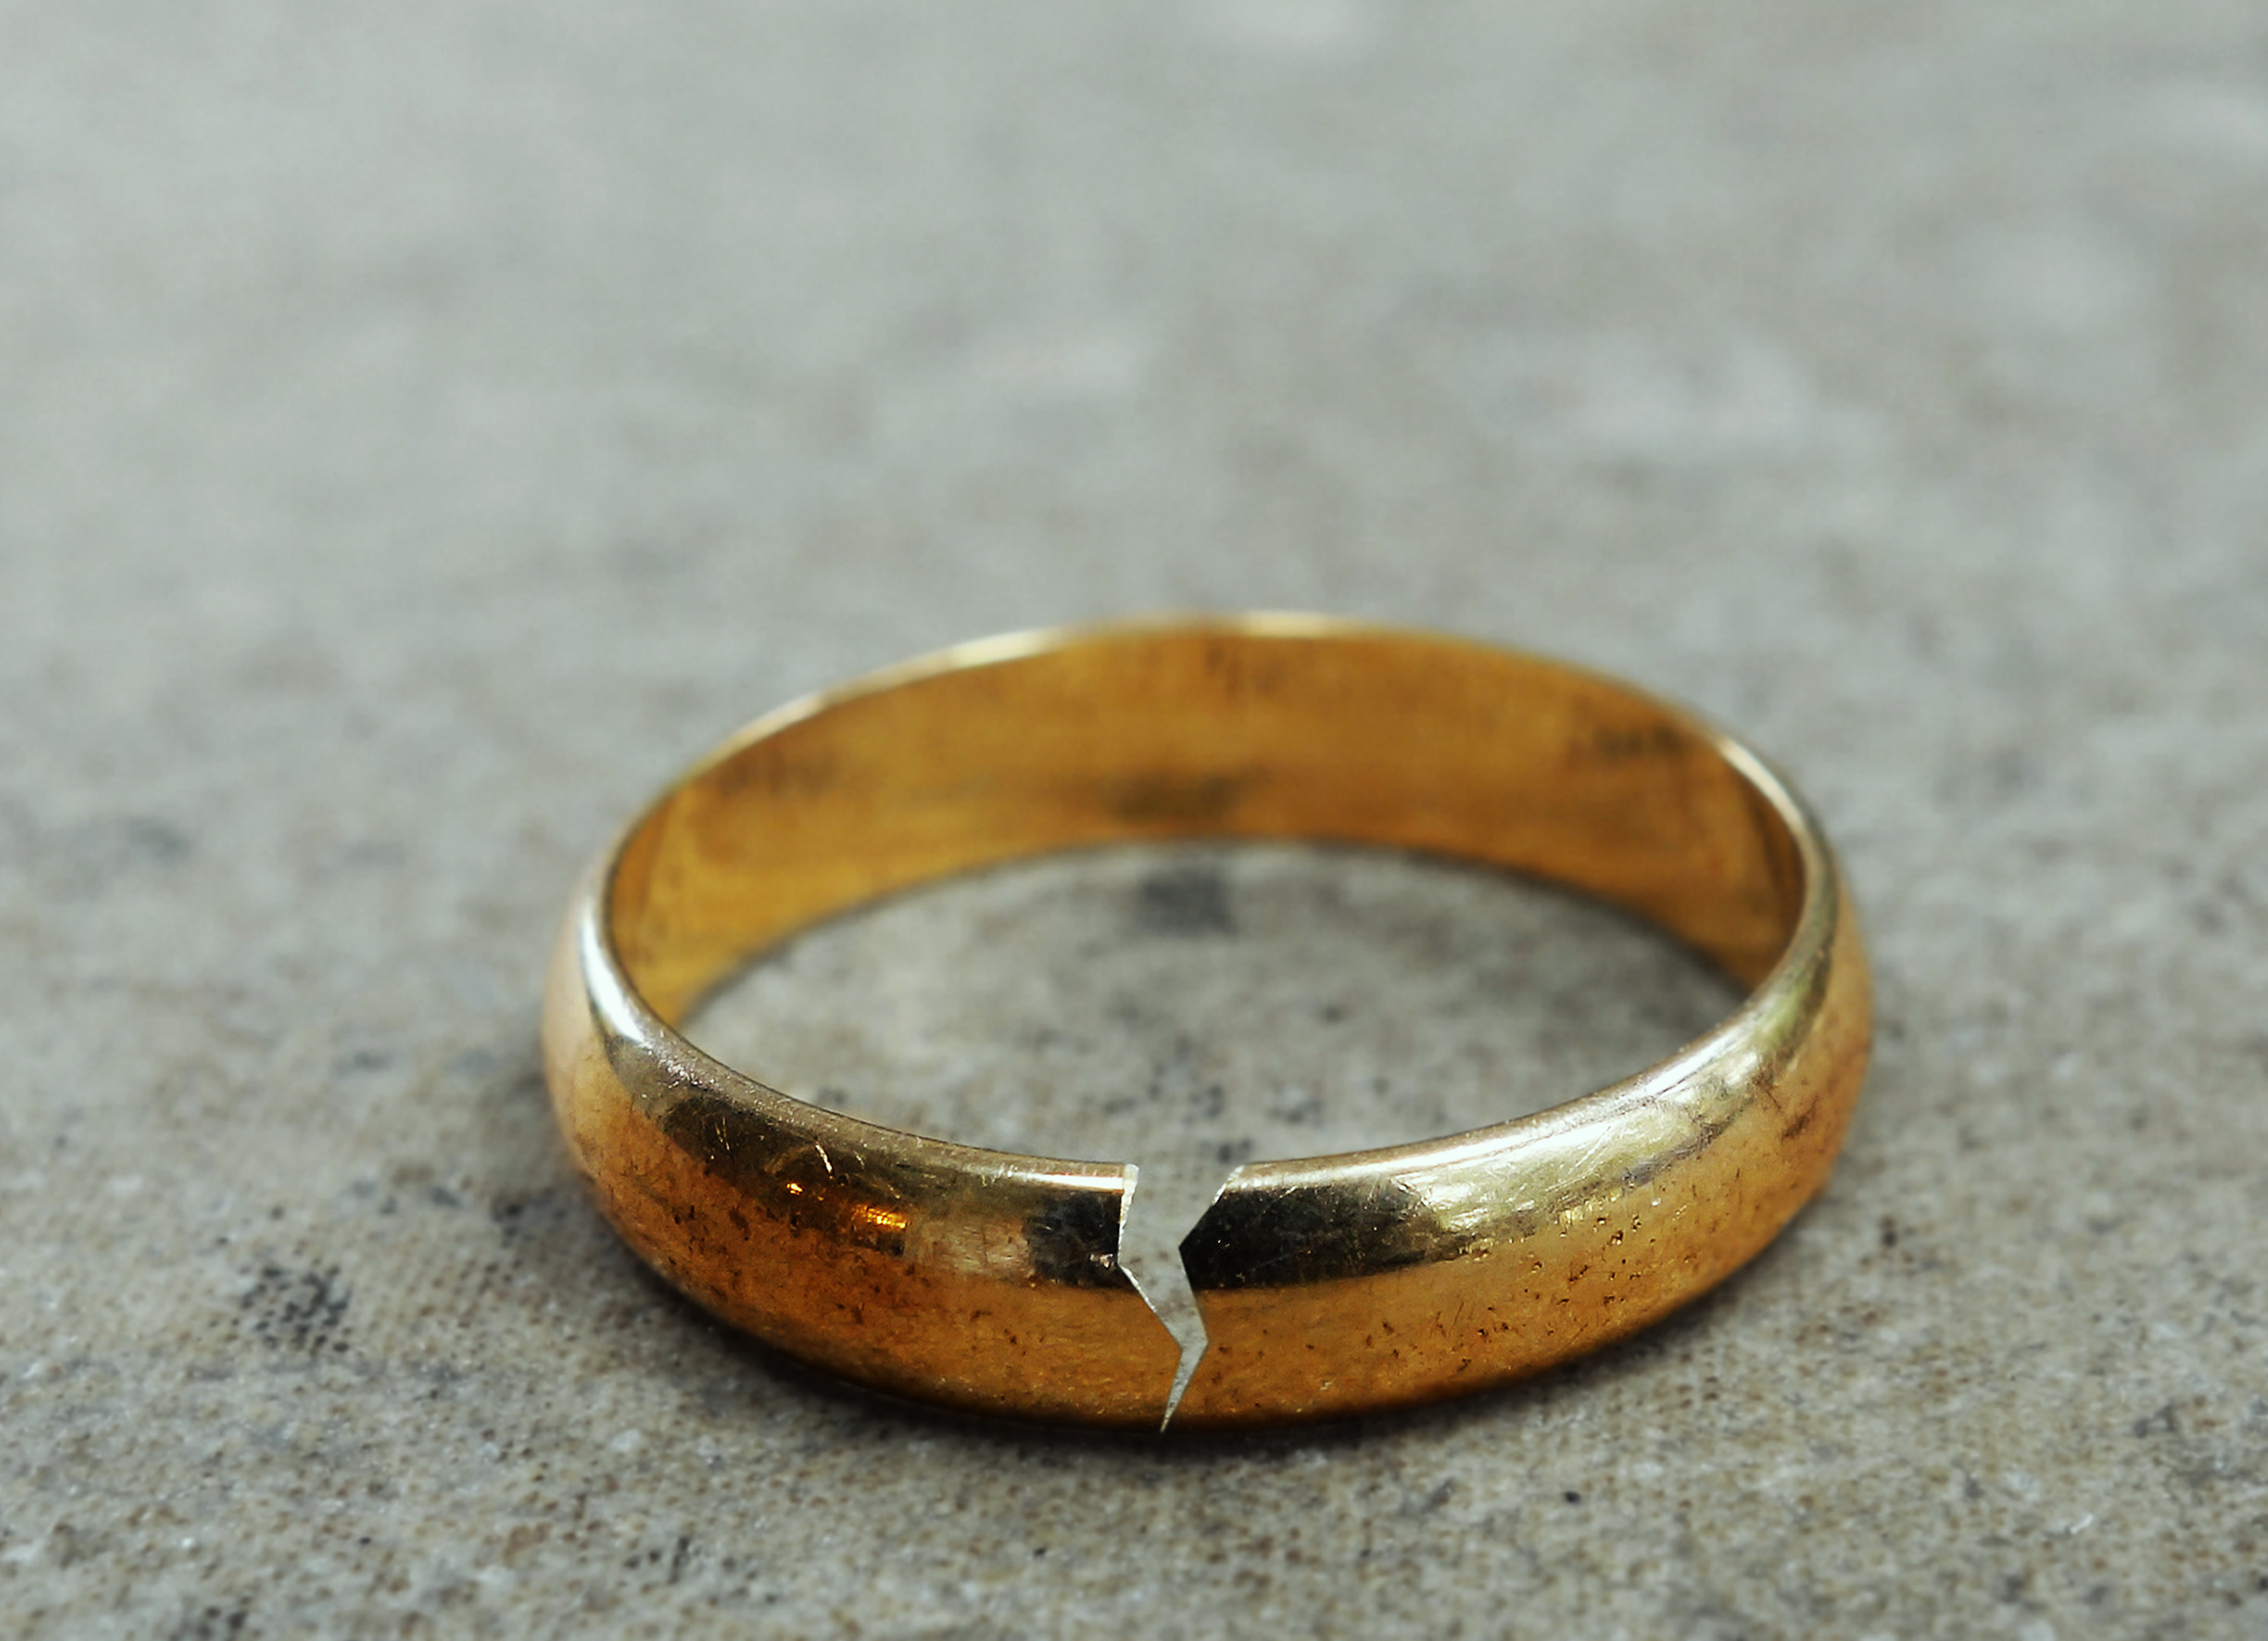 A cracked gold wedding ring | Source: Shutterstock